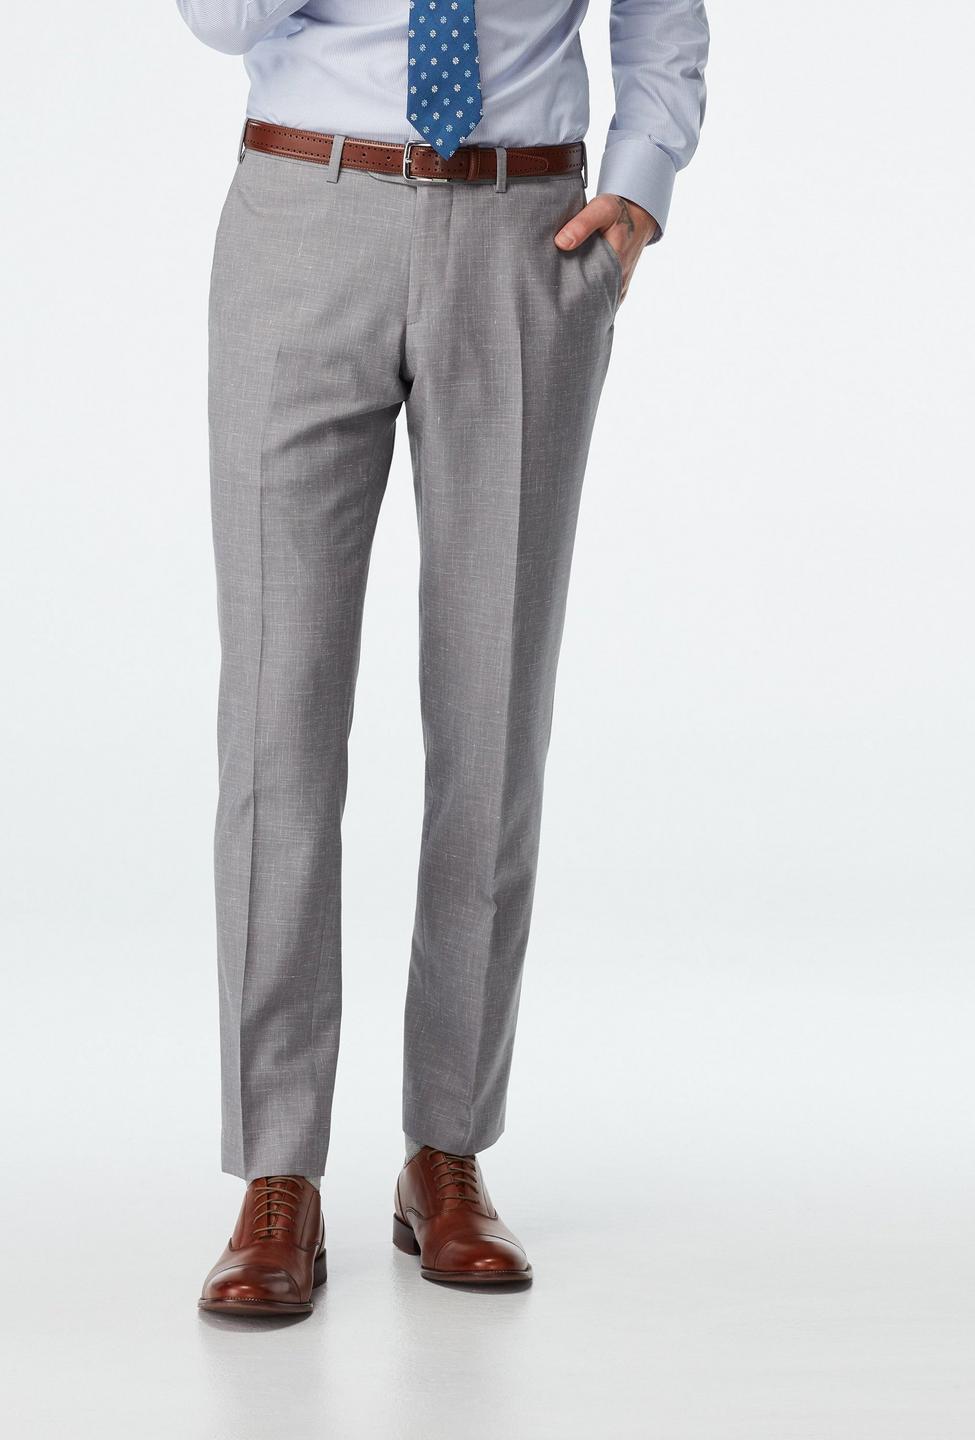 Gray pants - Stockport Solid Design from Seasonal Indochino Collection